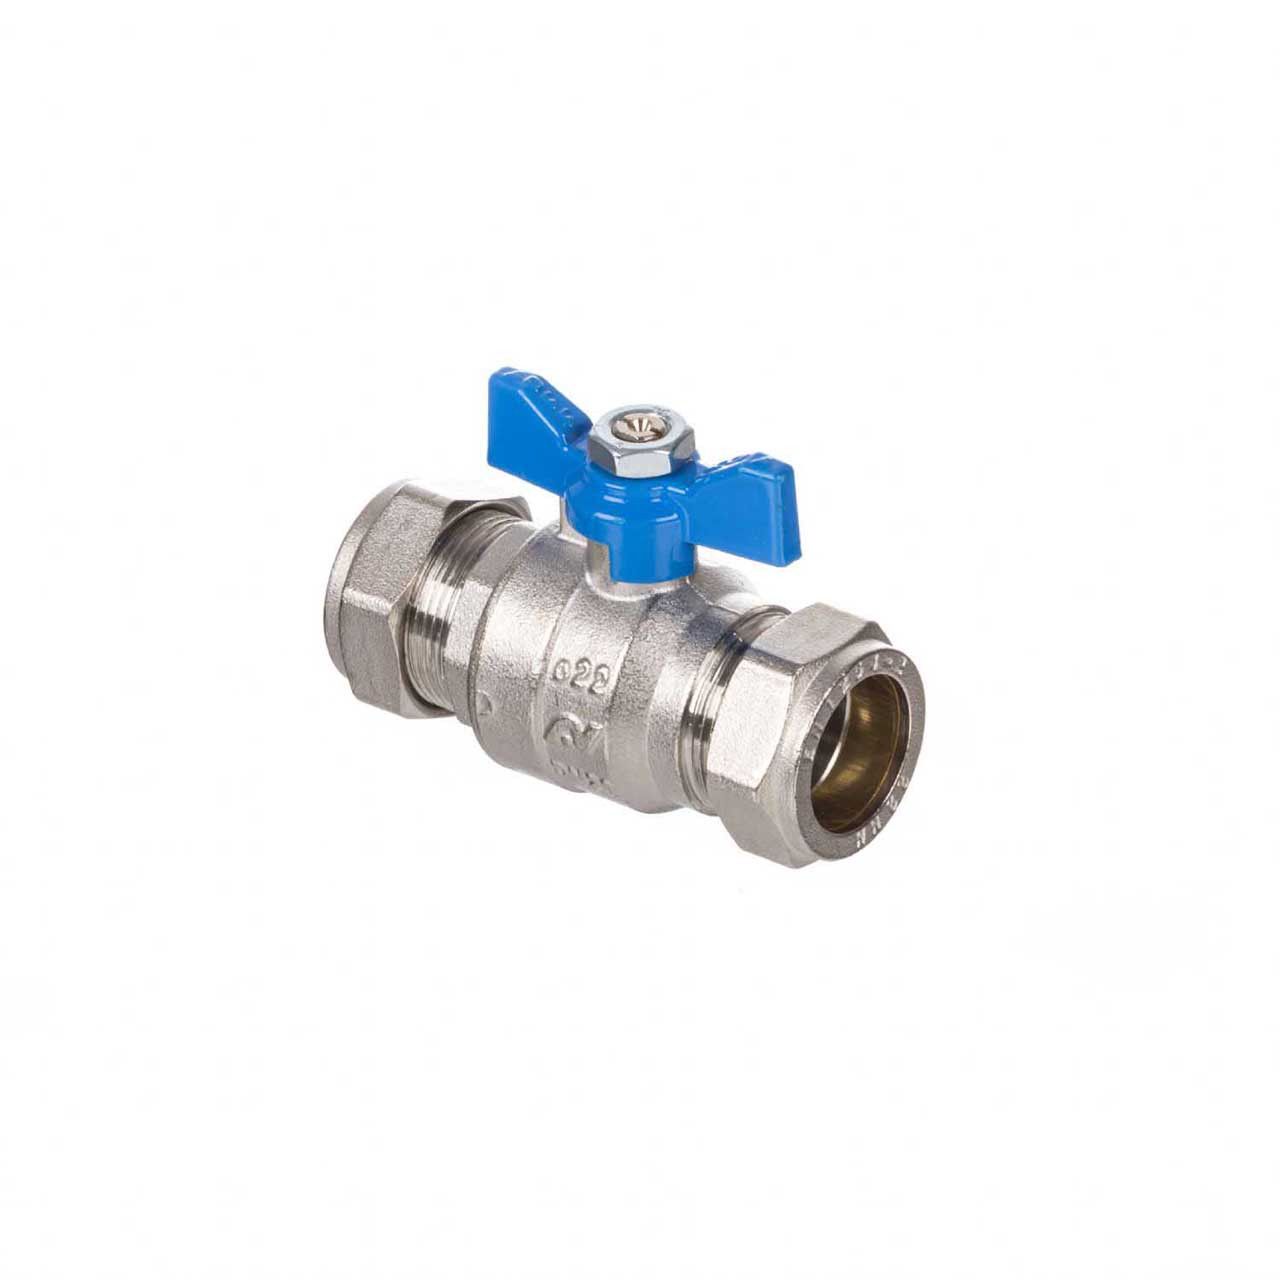 Photograph of Altecnic 15mm Butterfly Blue Handle Ball Valve